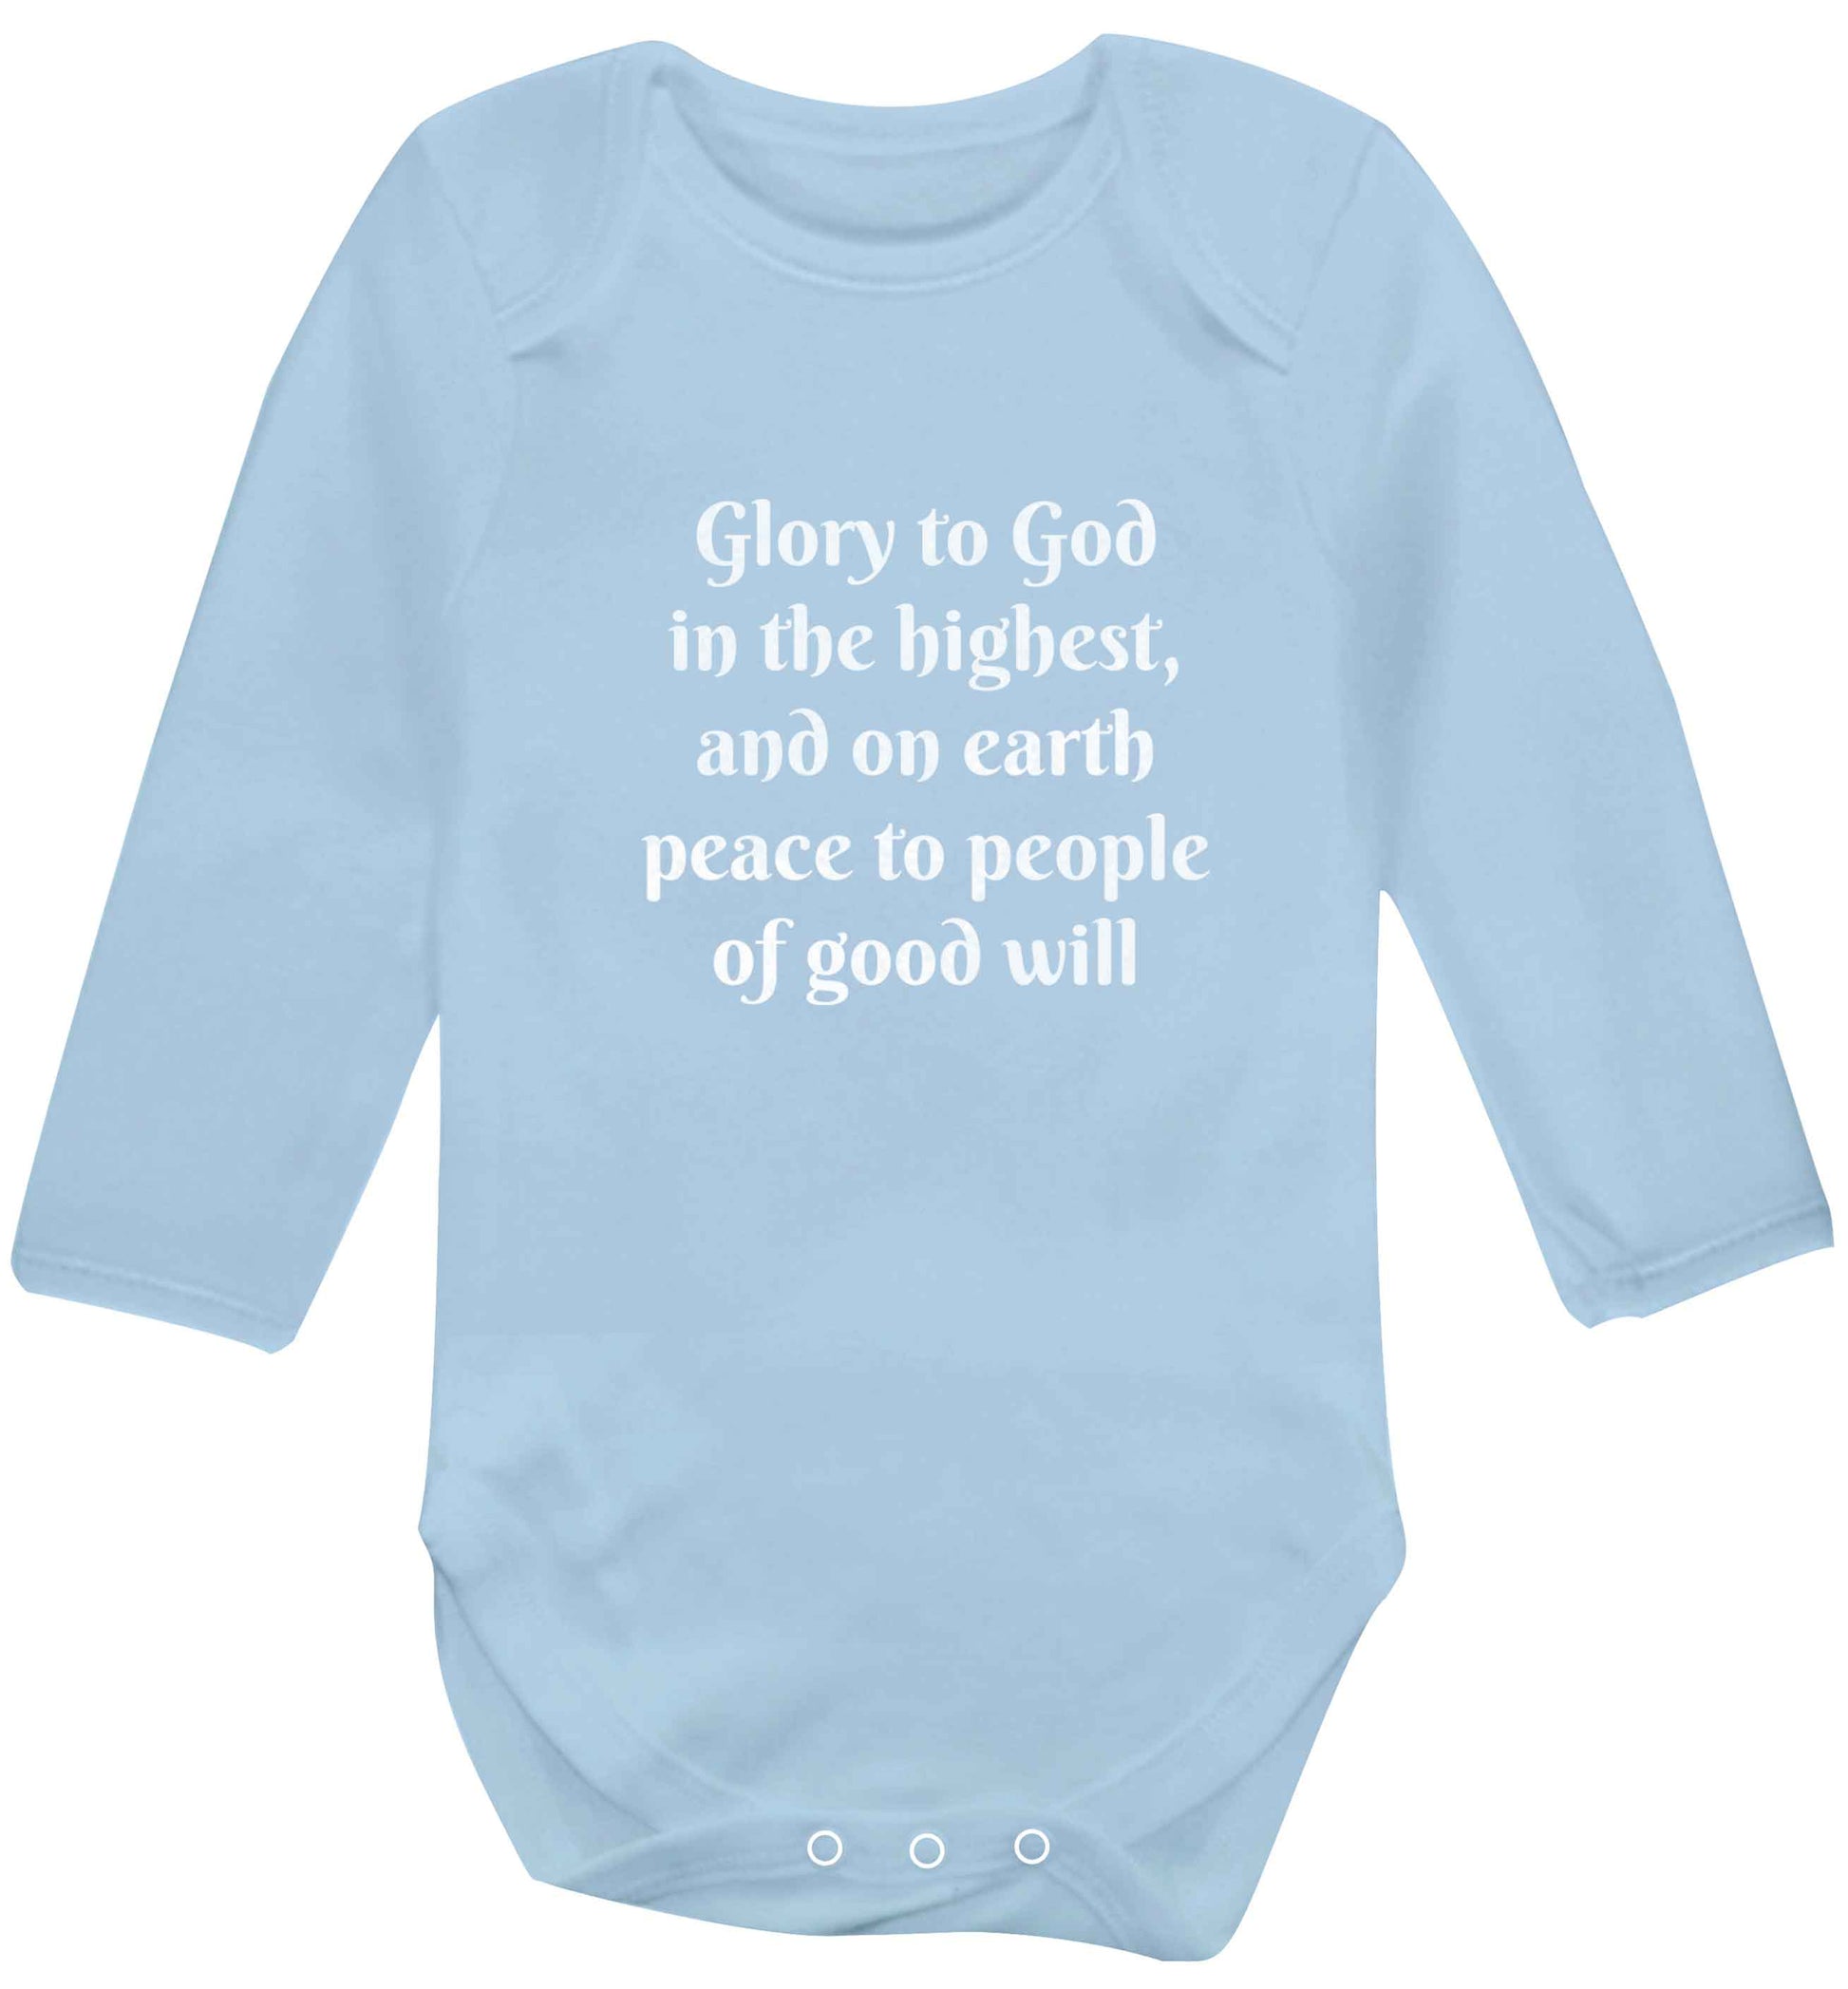 Glory to God in the highest, and on earth peace to people of good will baby vest long sleeved pale blue 6-12 months